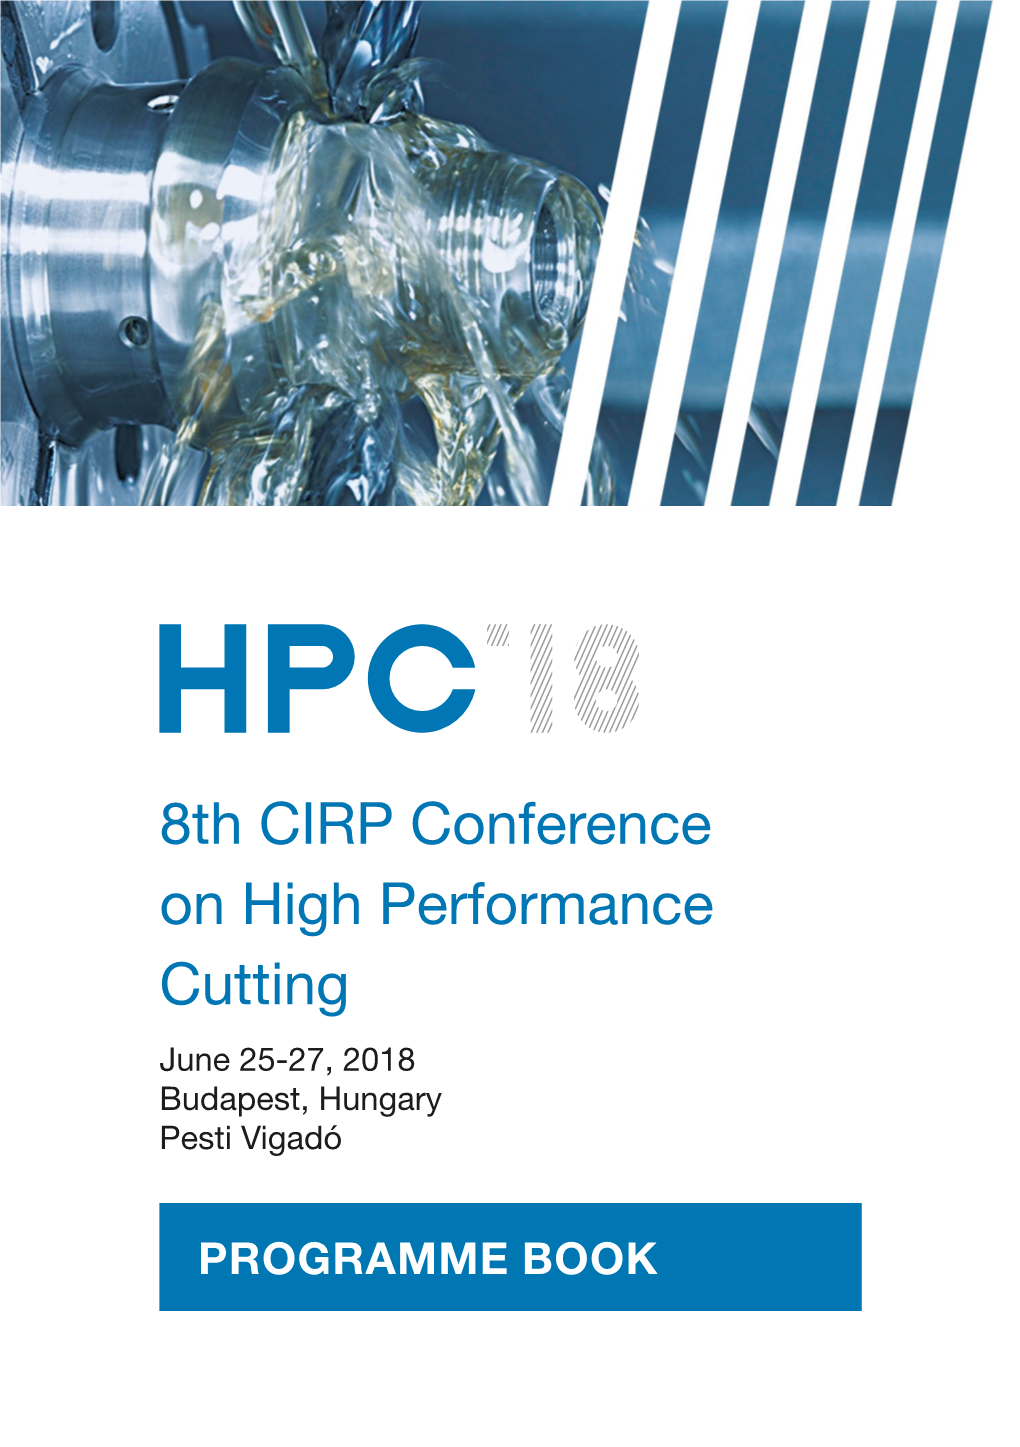 8Th CIRP Conference on High Performance Cutting June 25-27, 2018 Budapest, Hungary Pesti Vigadó